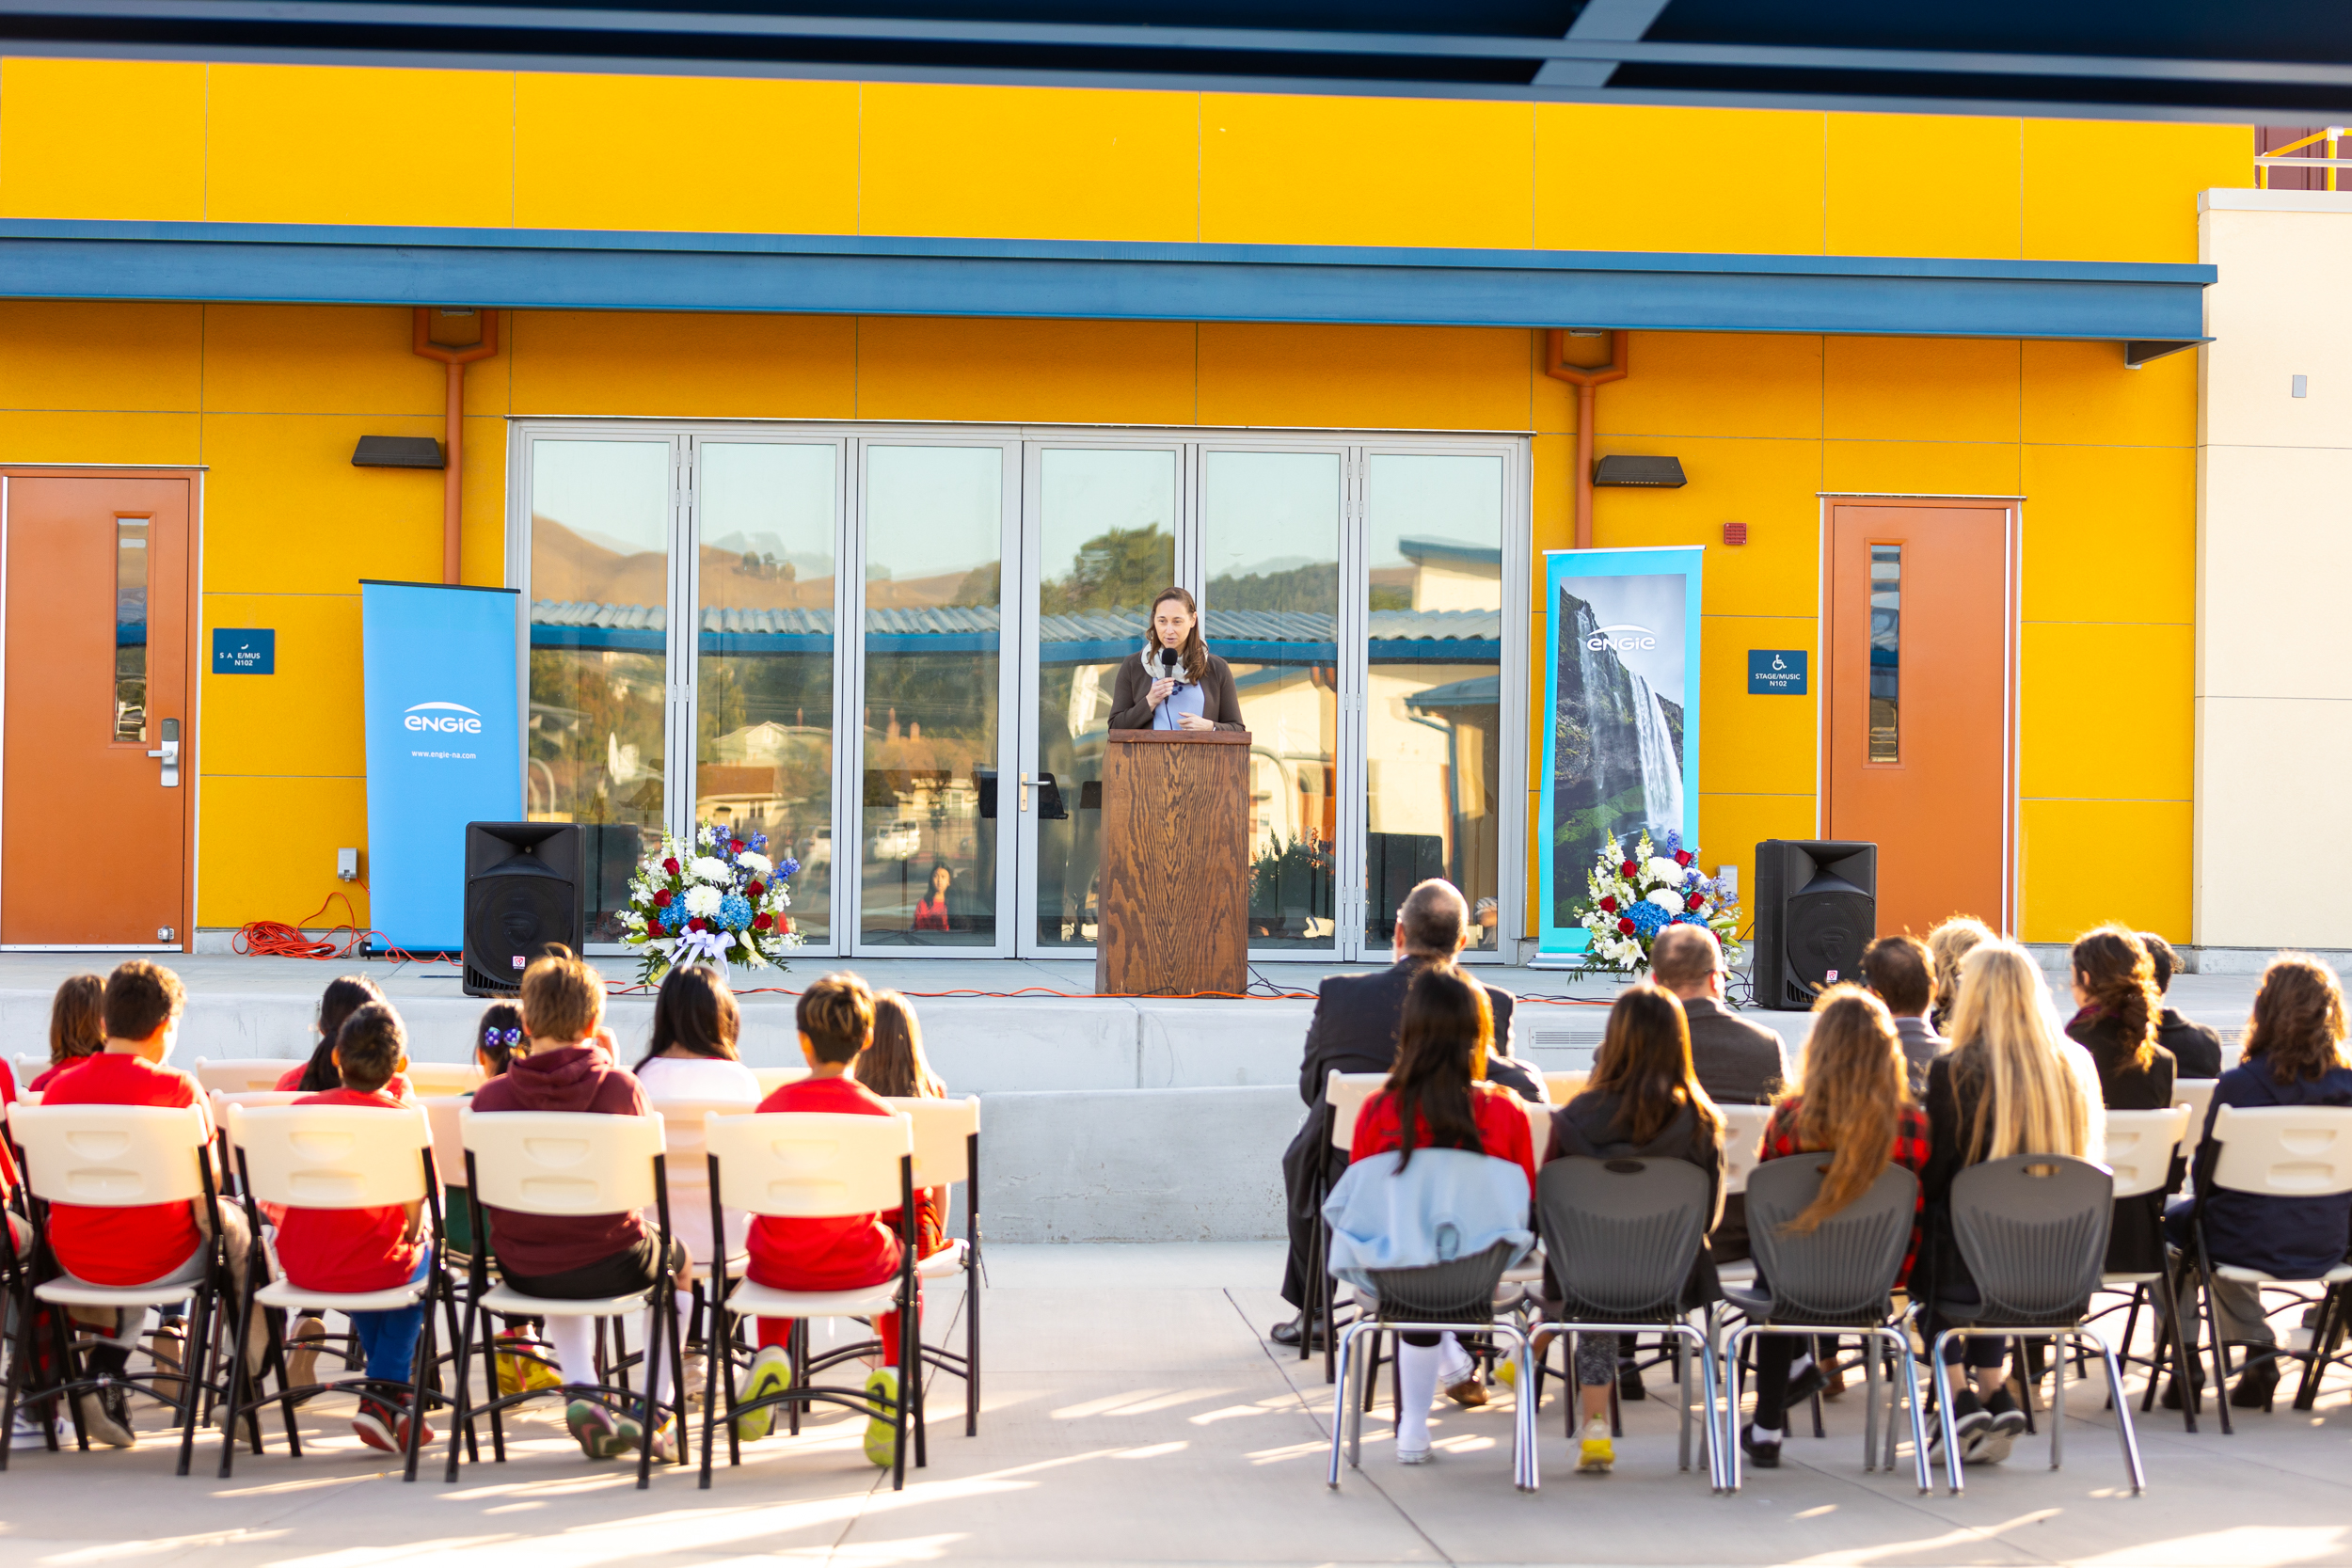 Dublin USD’s new, campus-wide clean energy program with ENGIE was announced at a ribbon-cutting event this week.